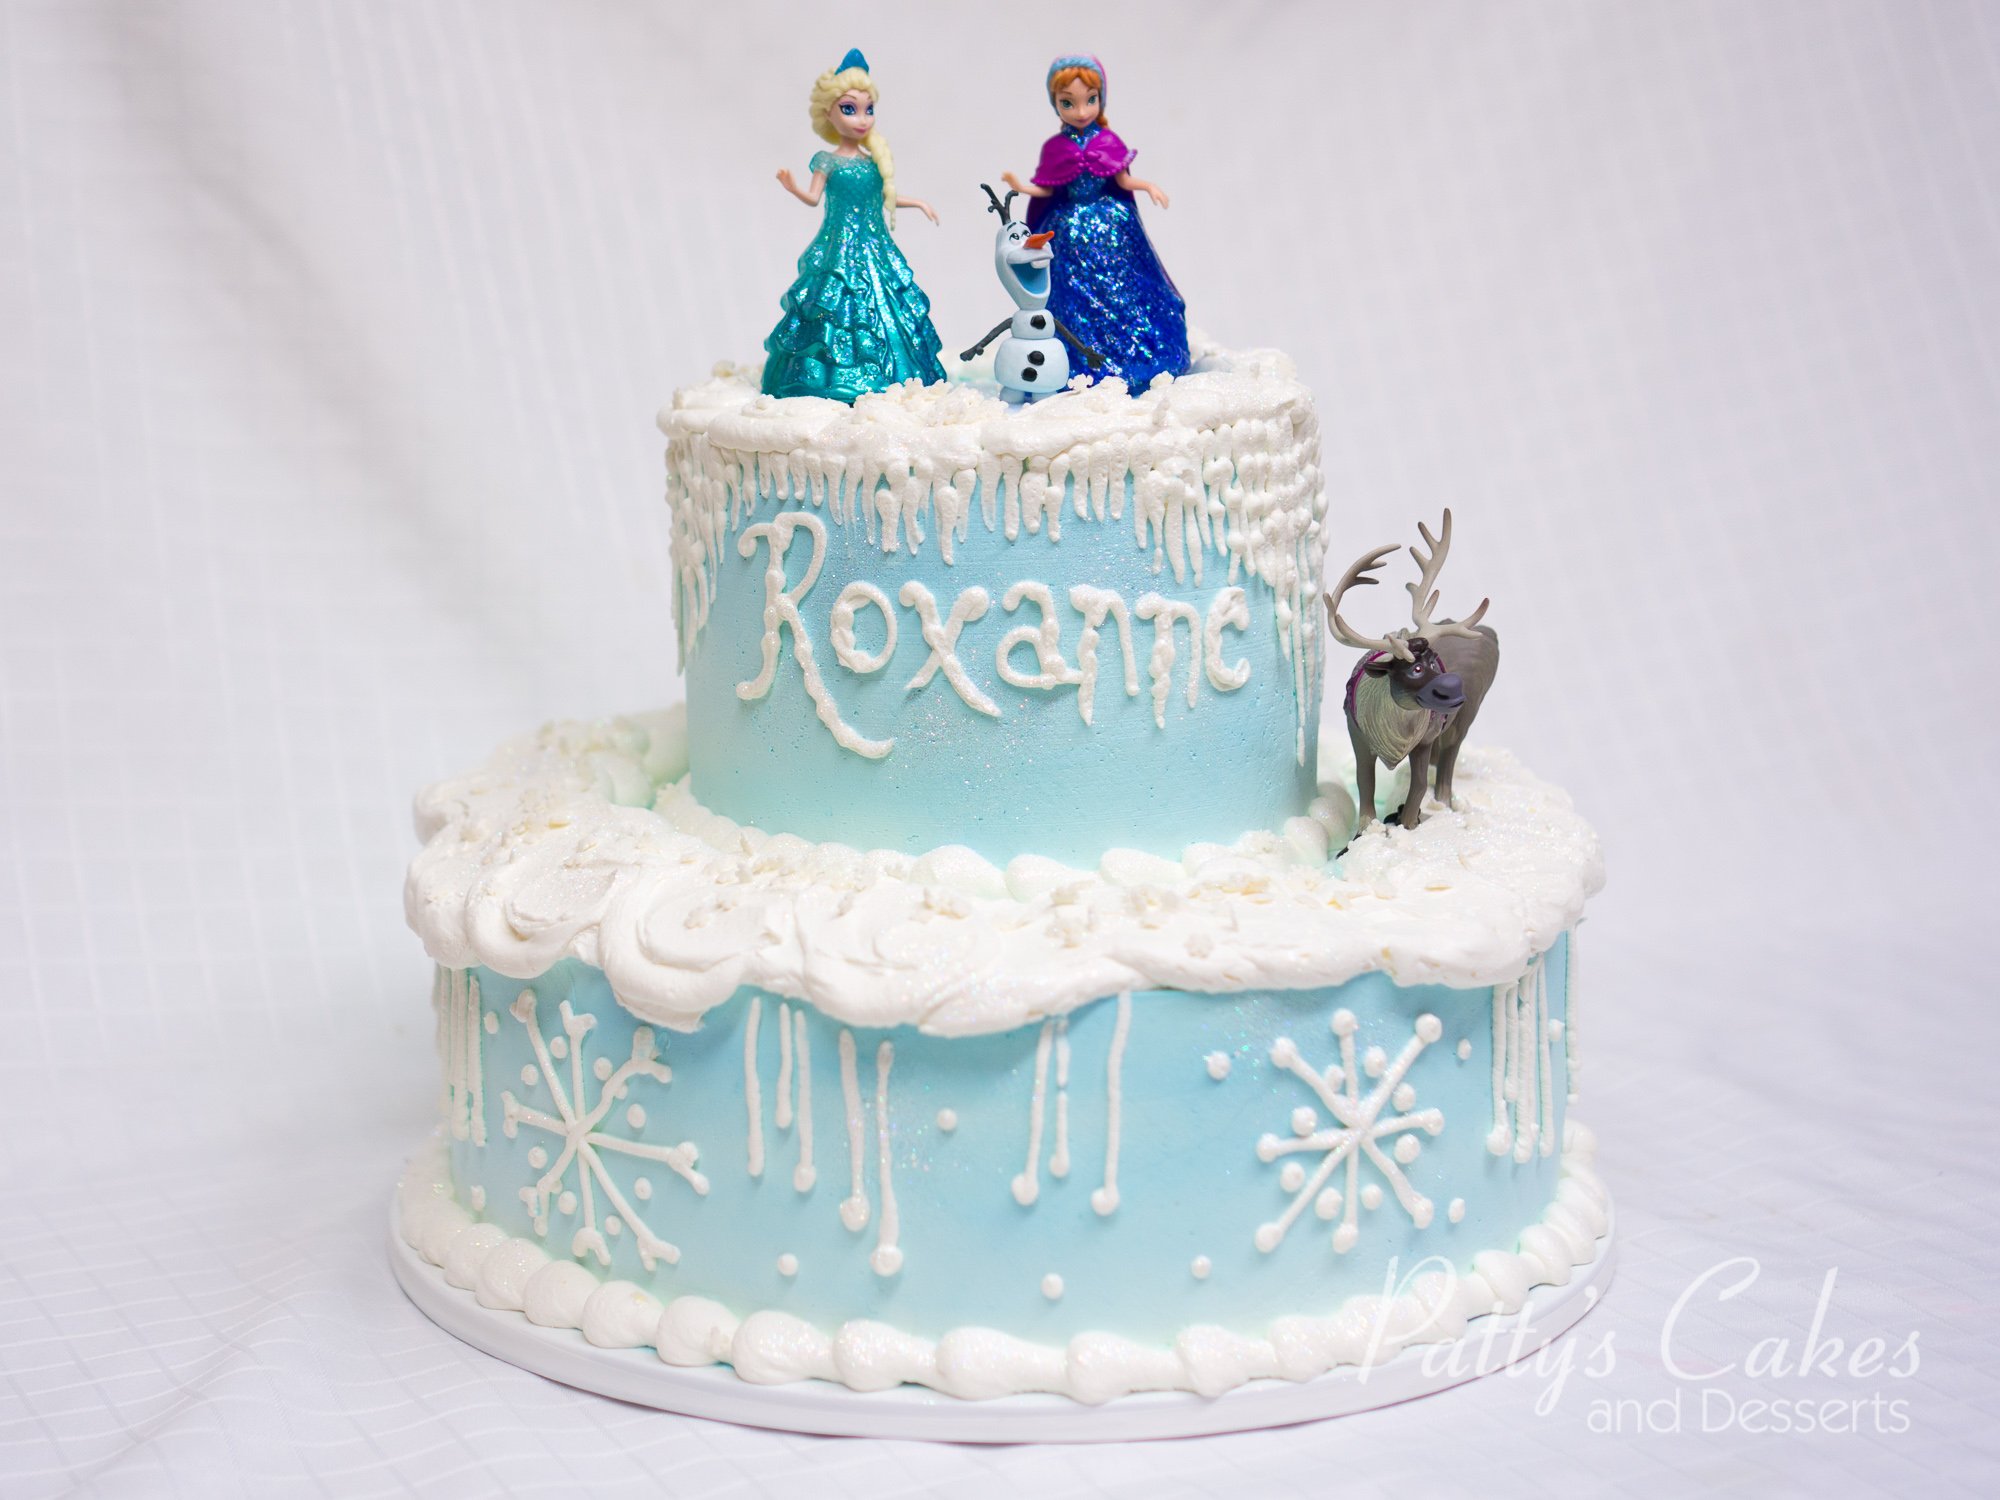 Photo of a Frozen birthday cake 2 tier - Patty's Cakes and Desserts